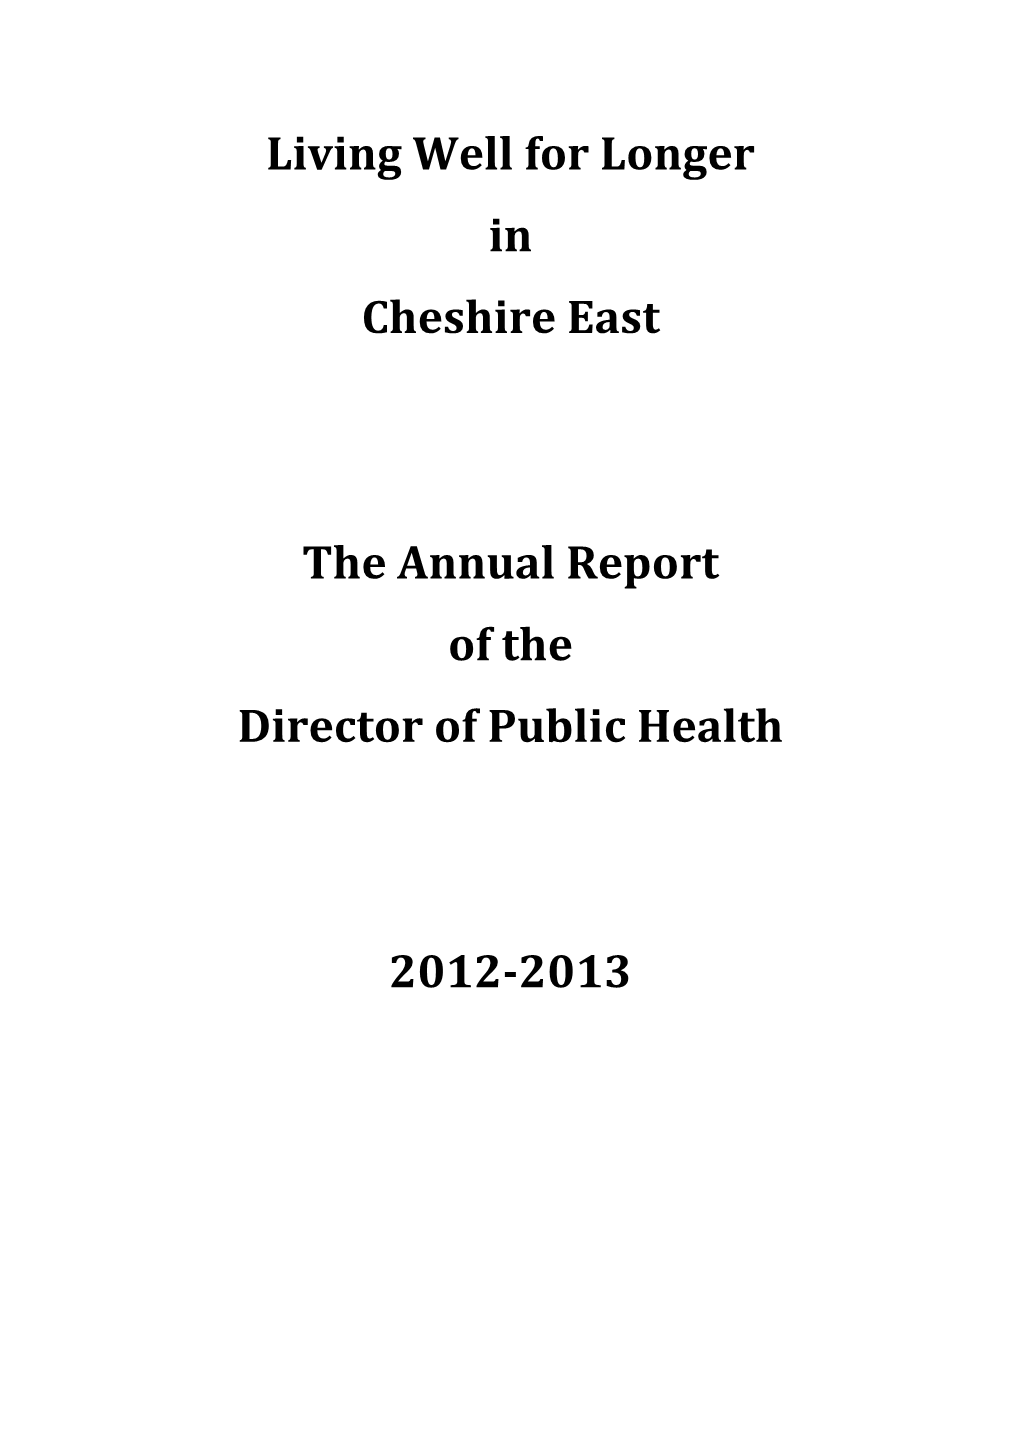 Living Well for Longer in Cheshire East the Annual Report of The